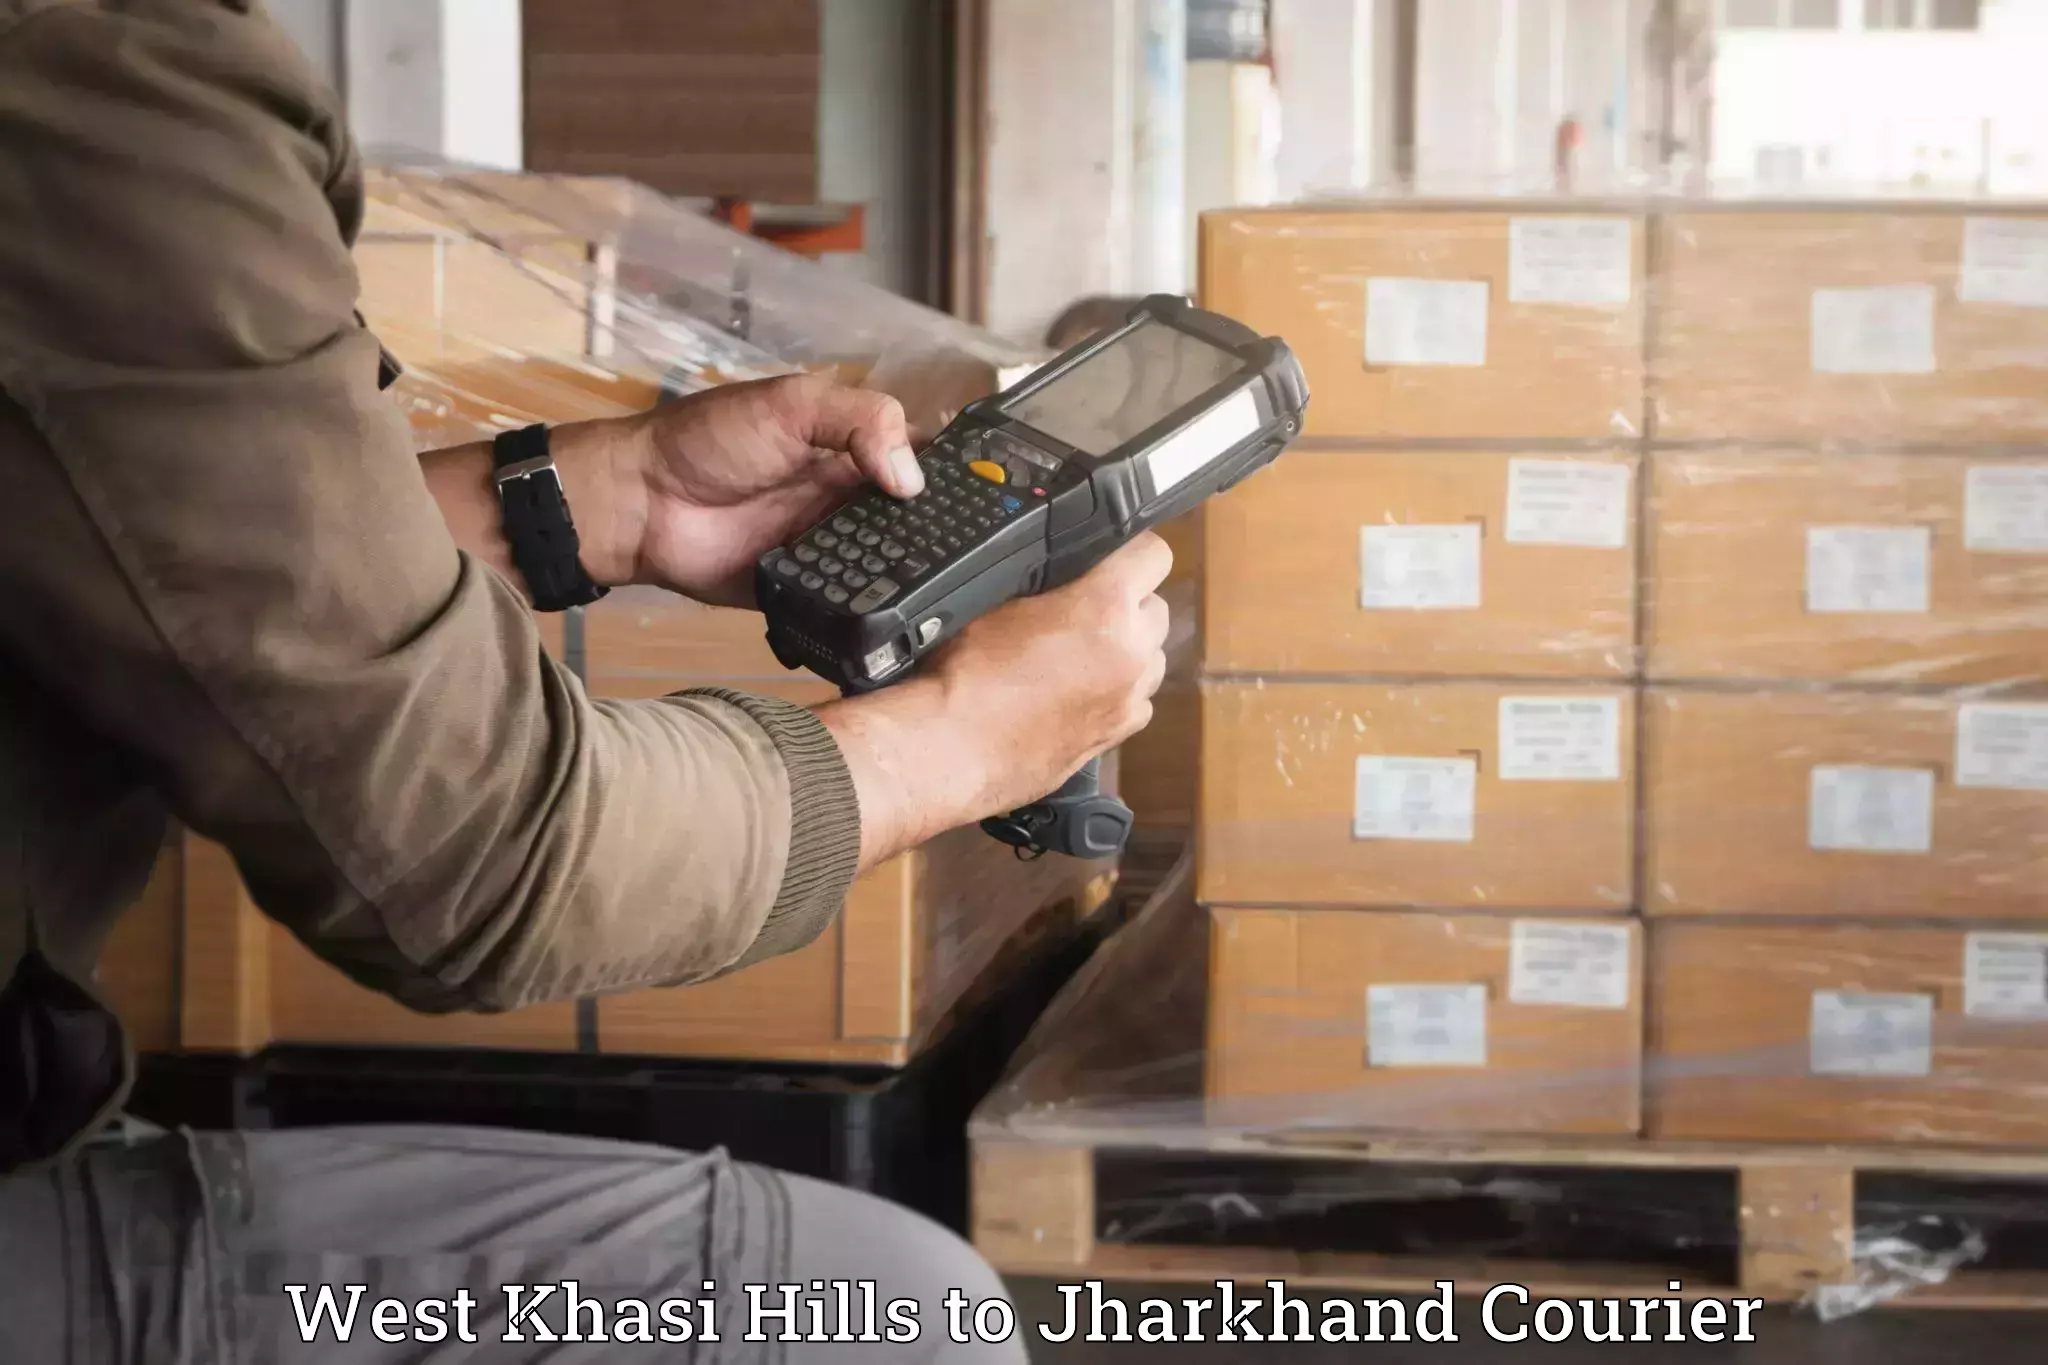 Professional packing services in West Khasi Hills to Jharkhand